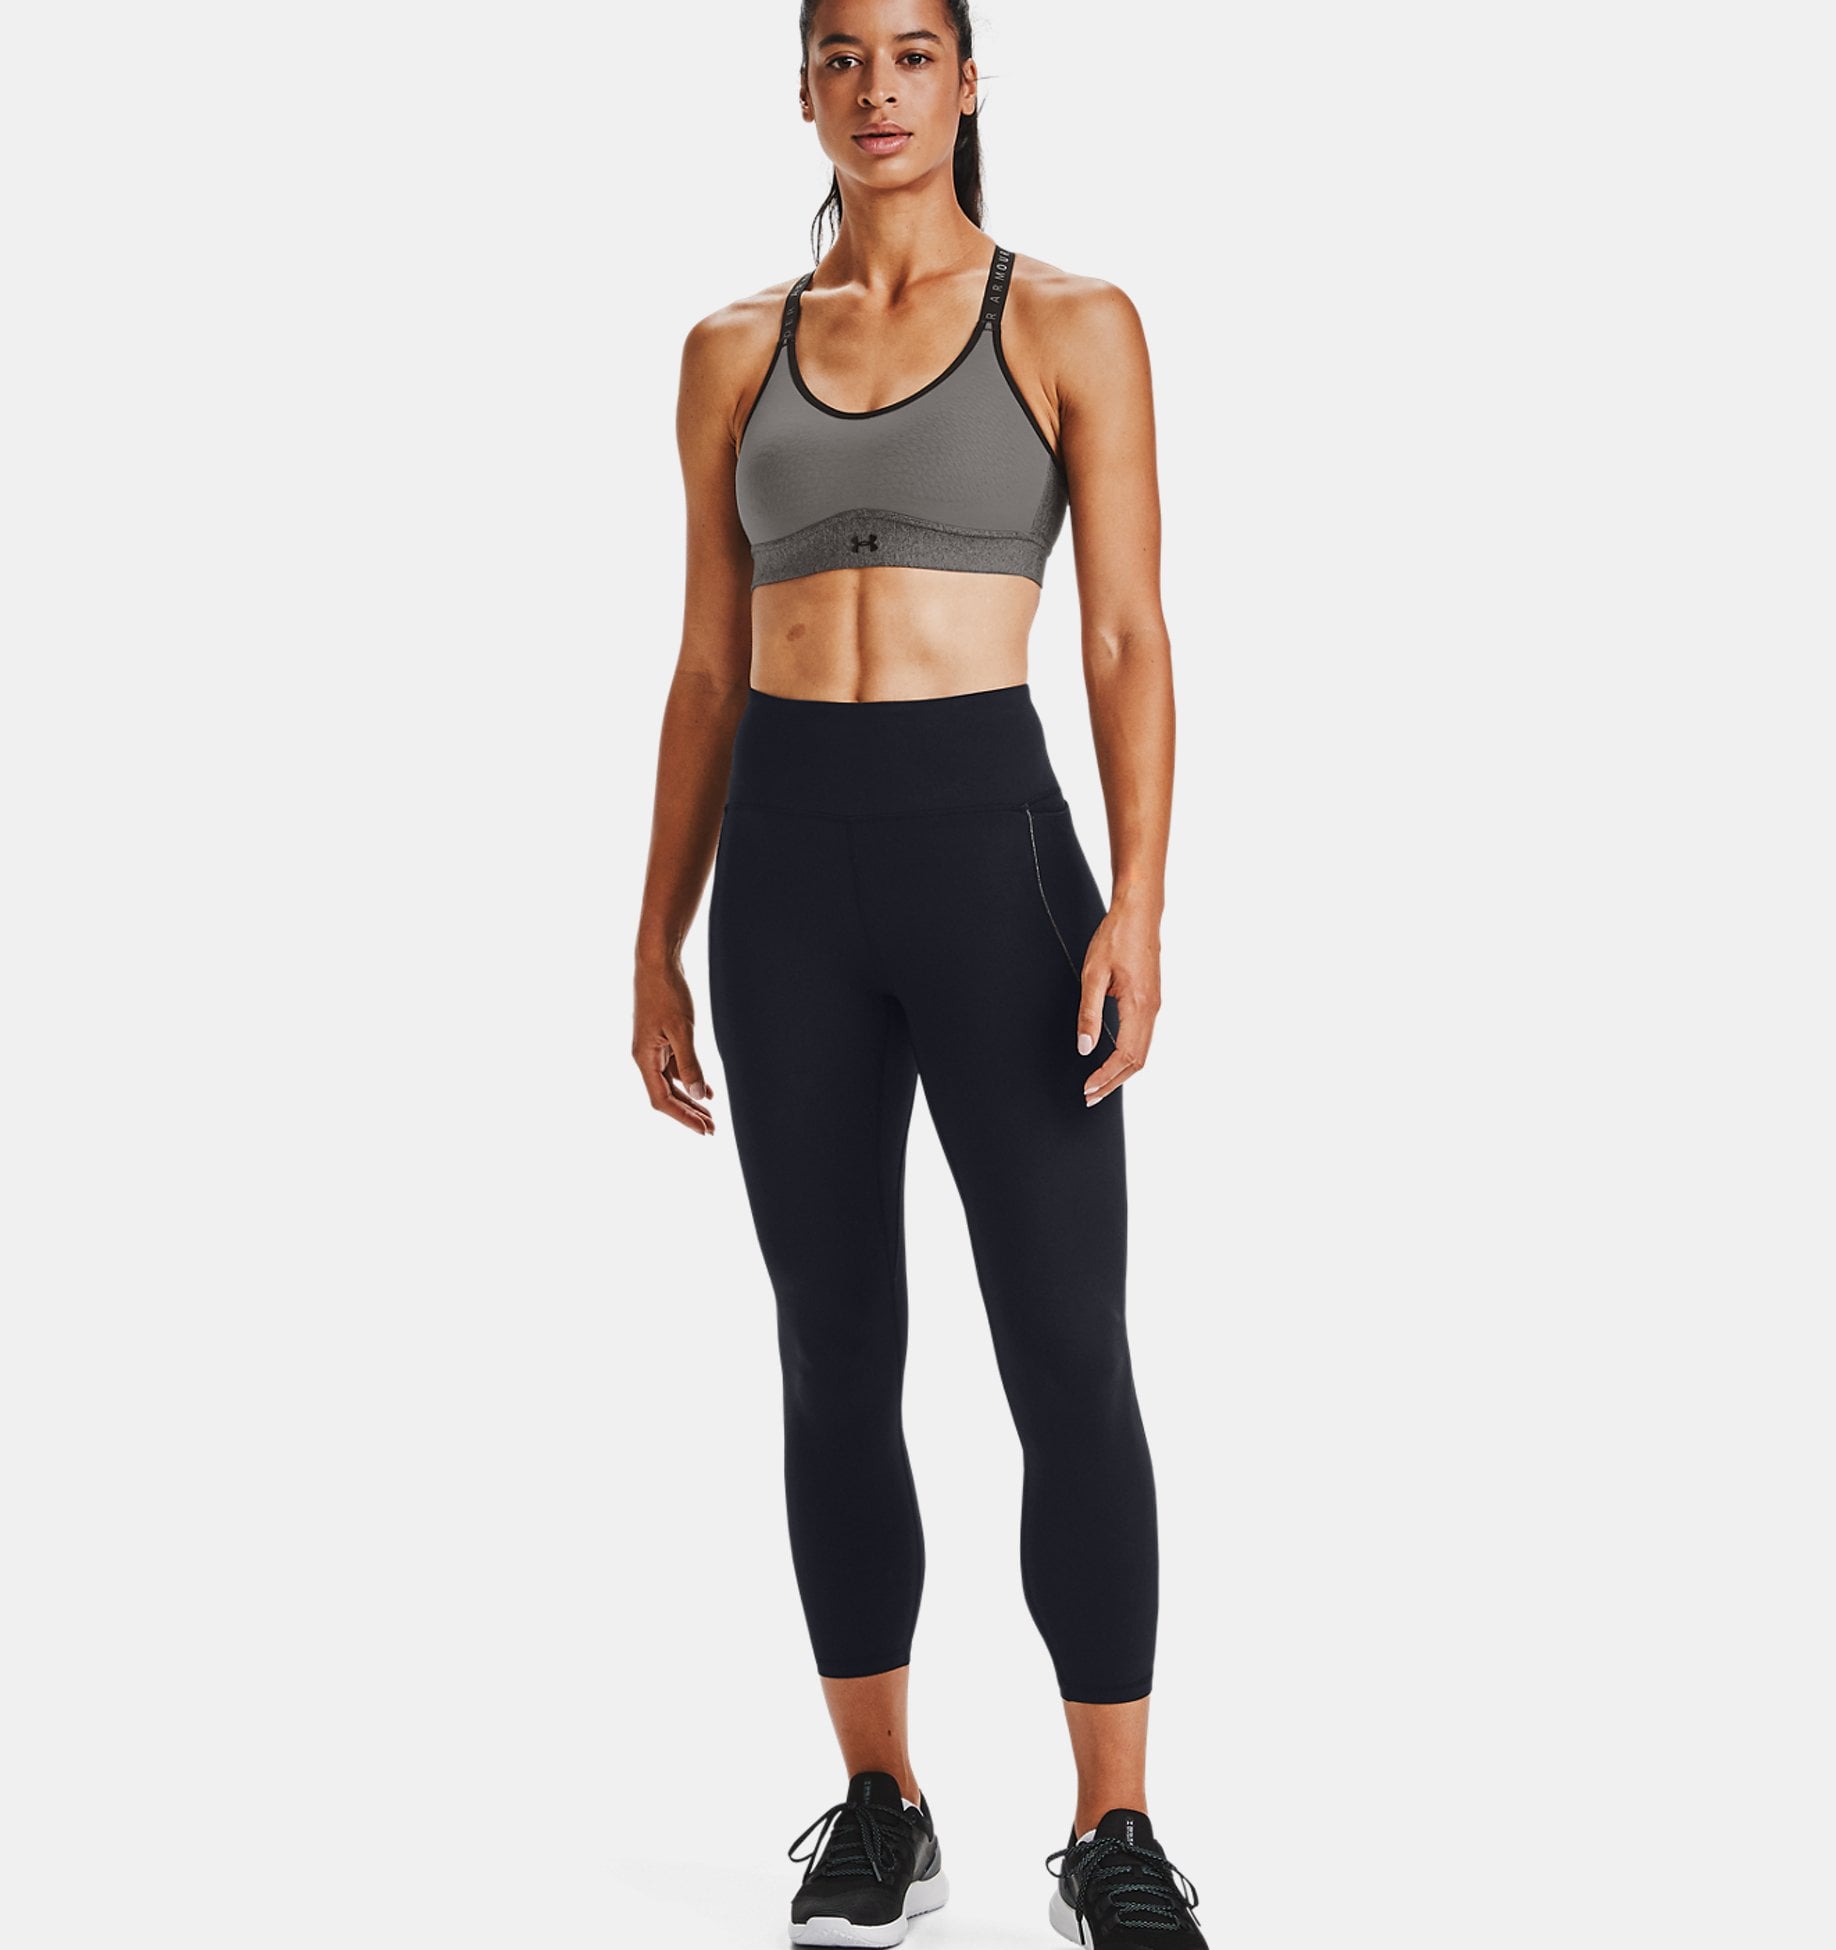 Womens compression 7/8 leggings Under Armour MERIDIAN ULTRA HIGH